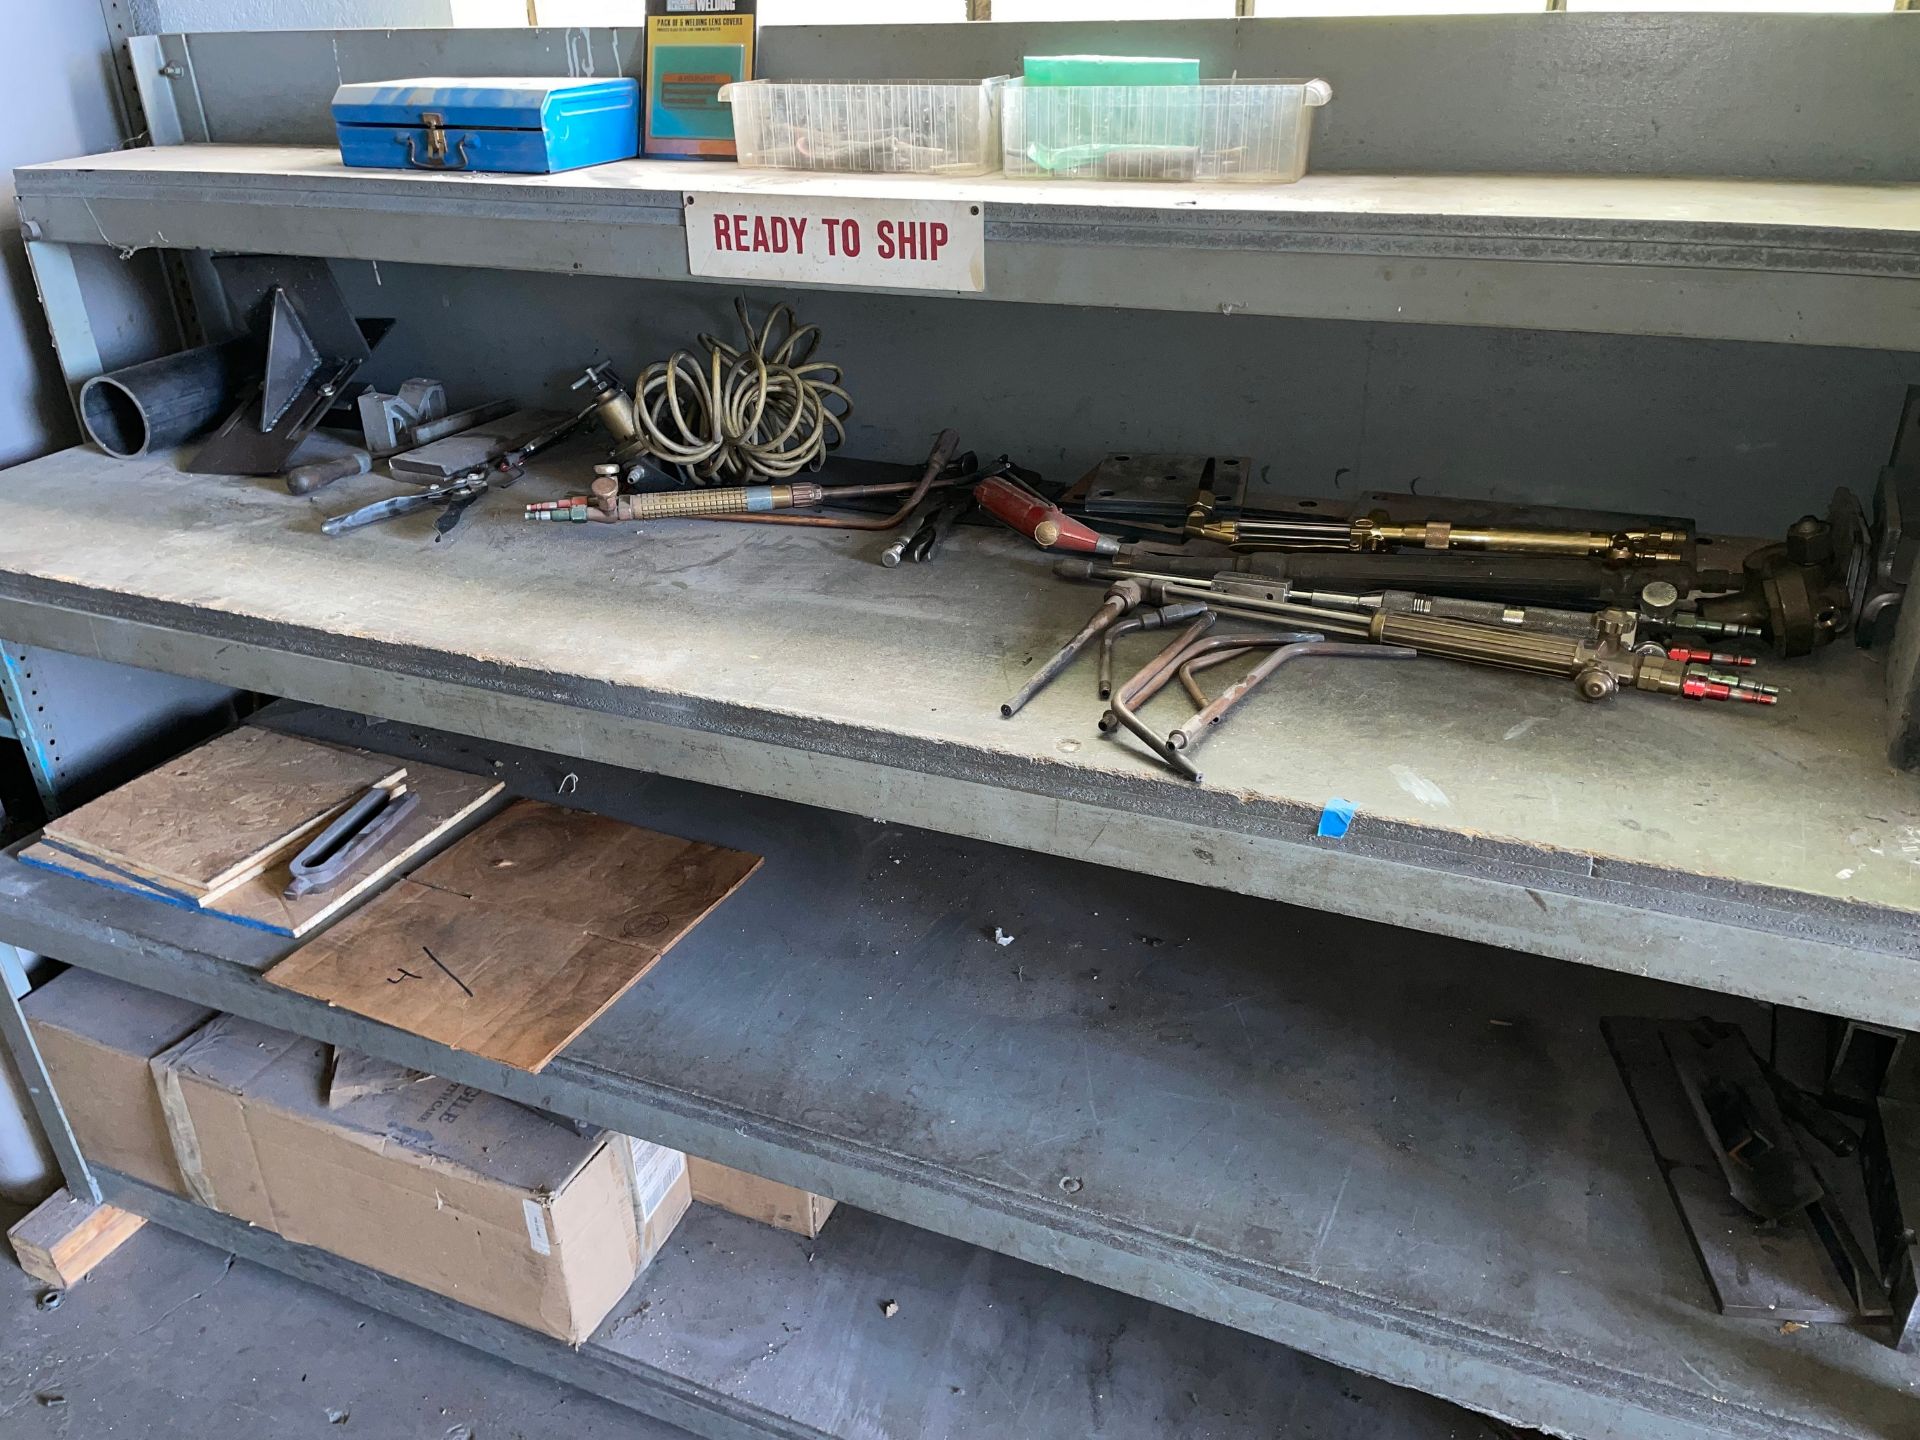 Lot with (3) Sections of Shelving and Workstation with Contents of Welding Supplies - Image 5 of 6